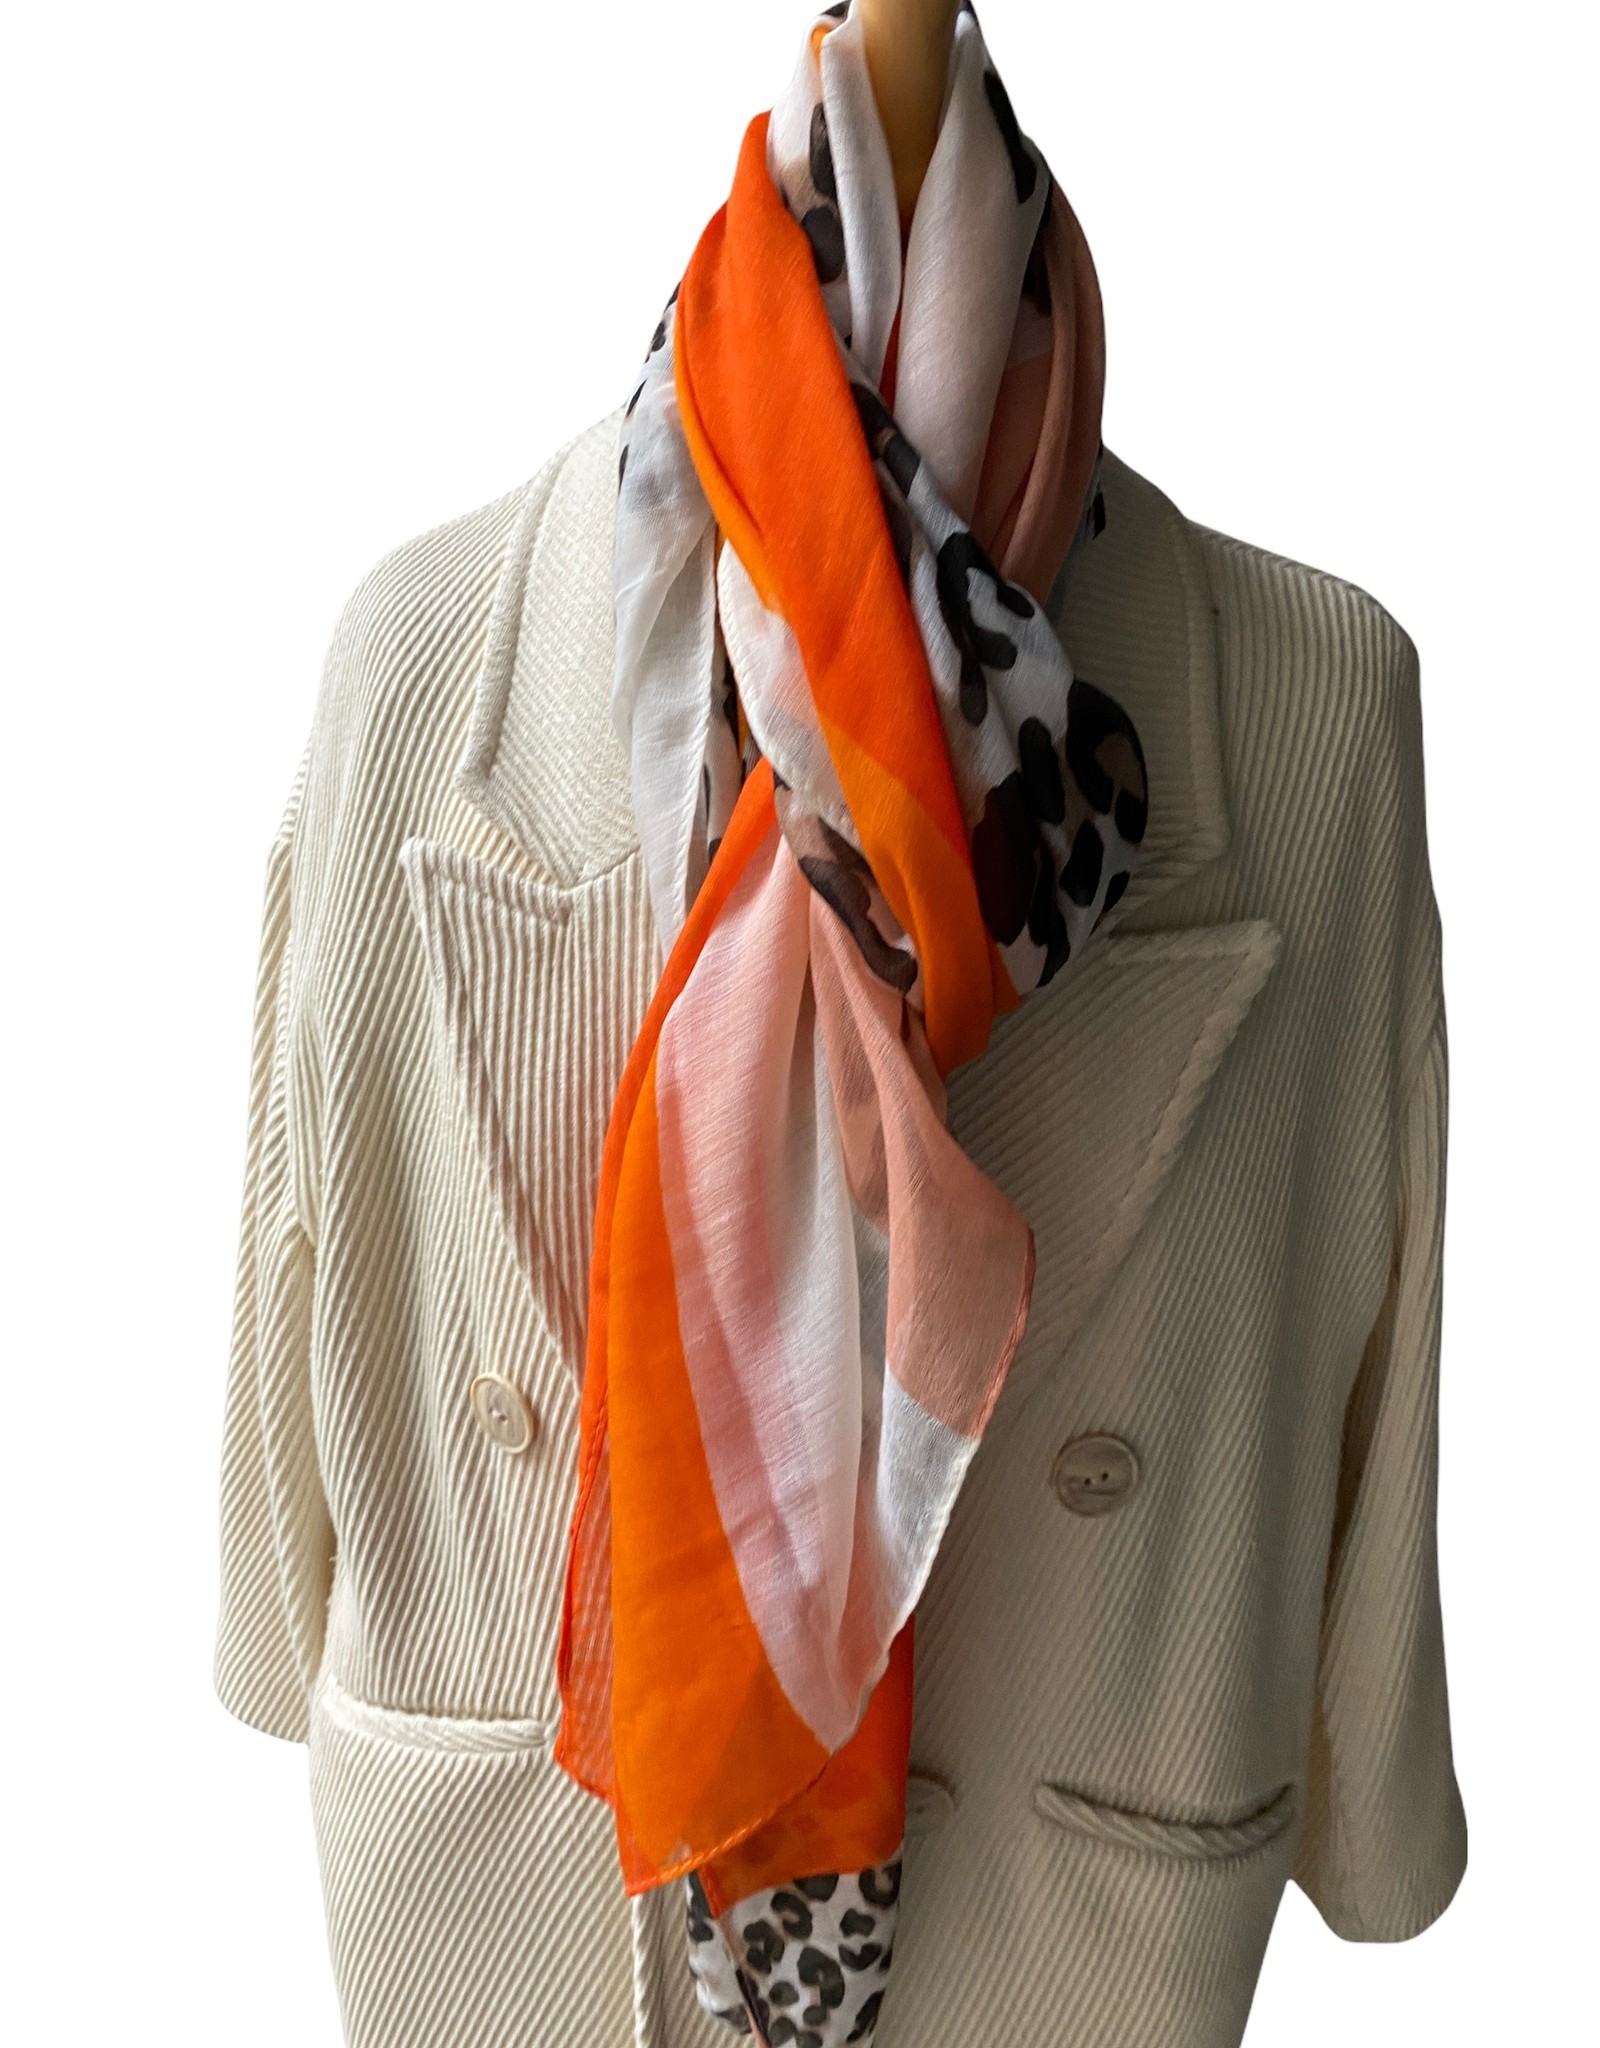 Coton scarf long with leopardprint with orange colors